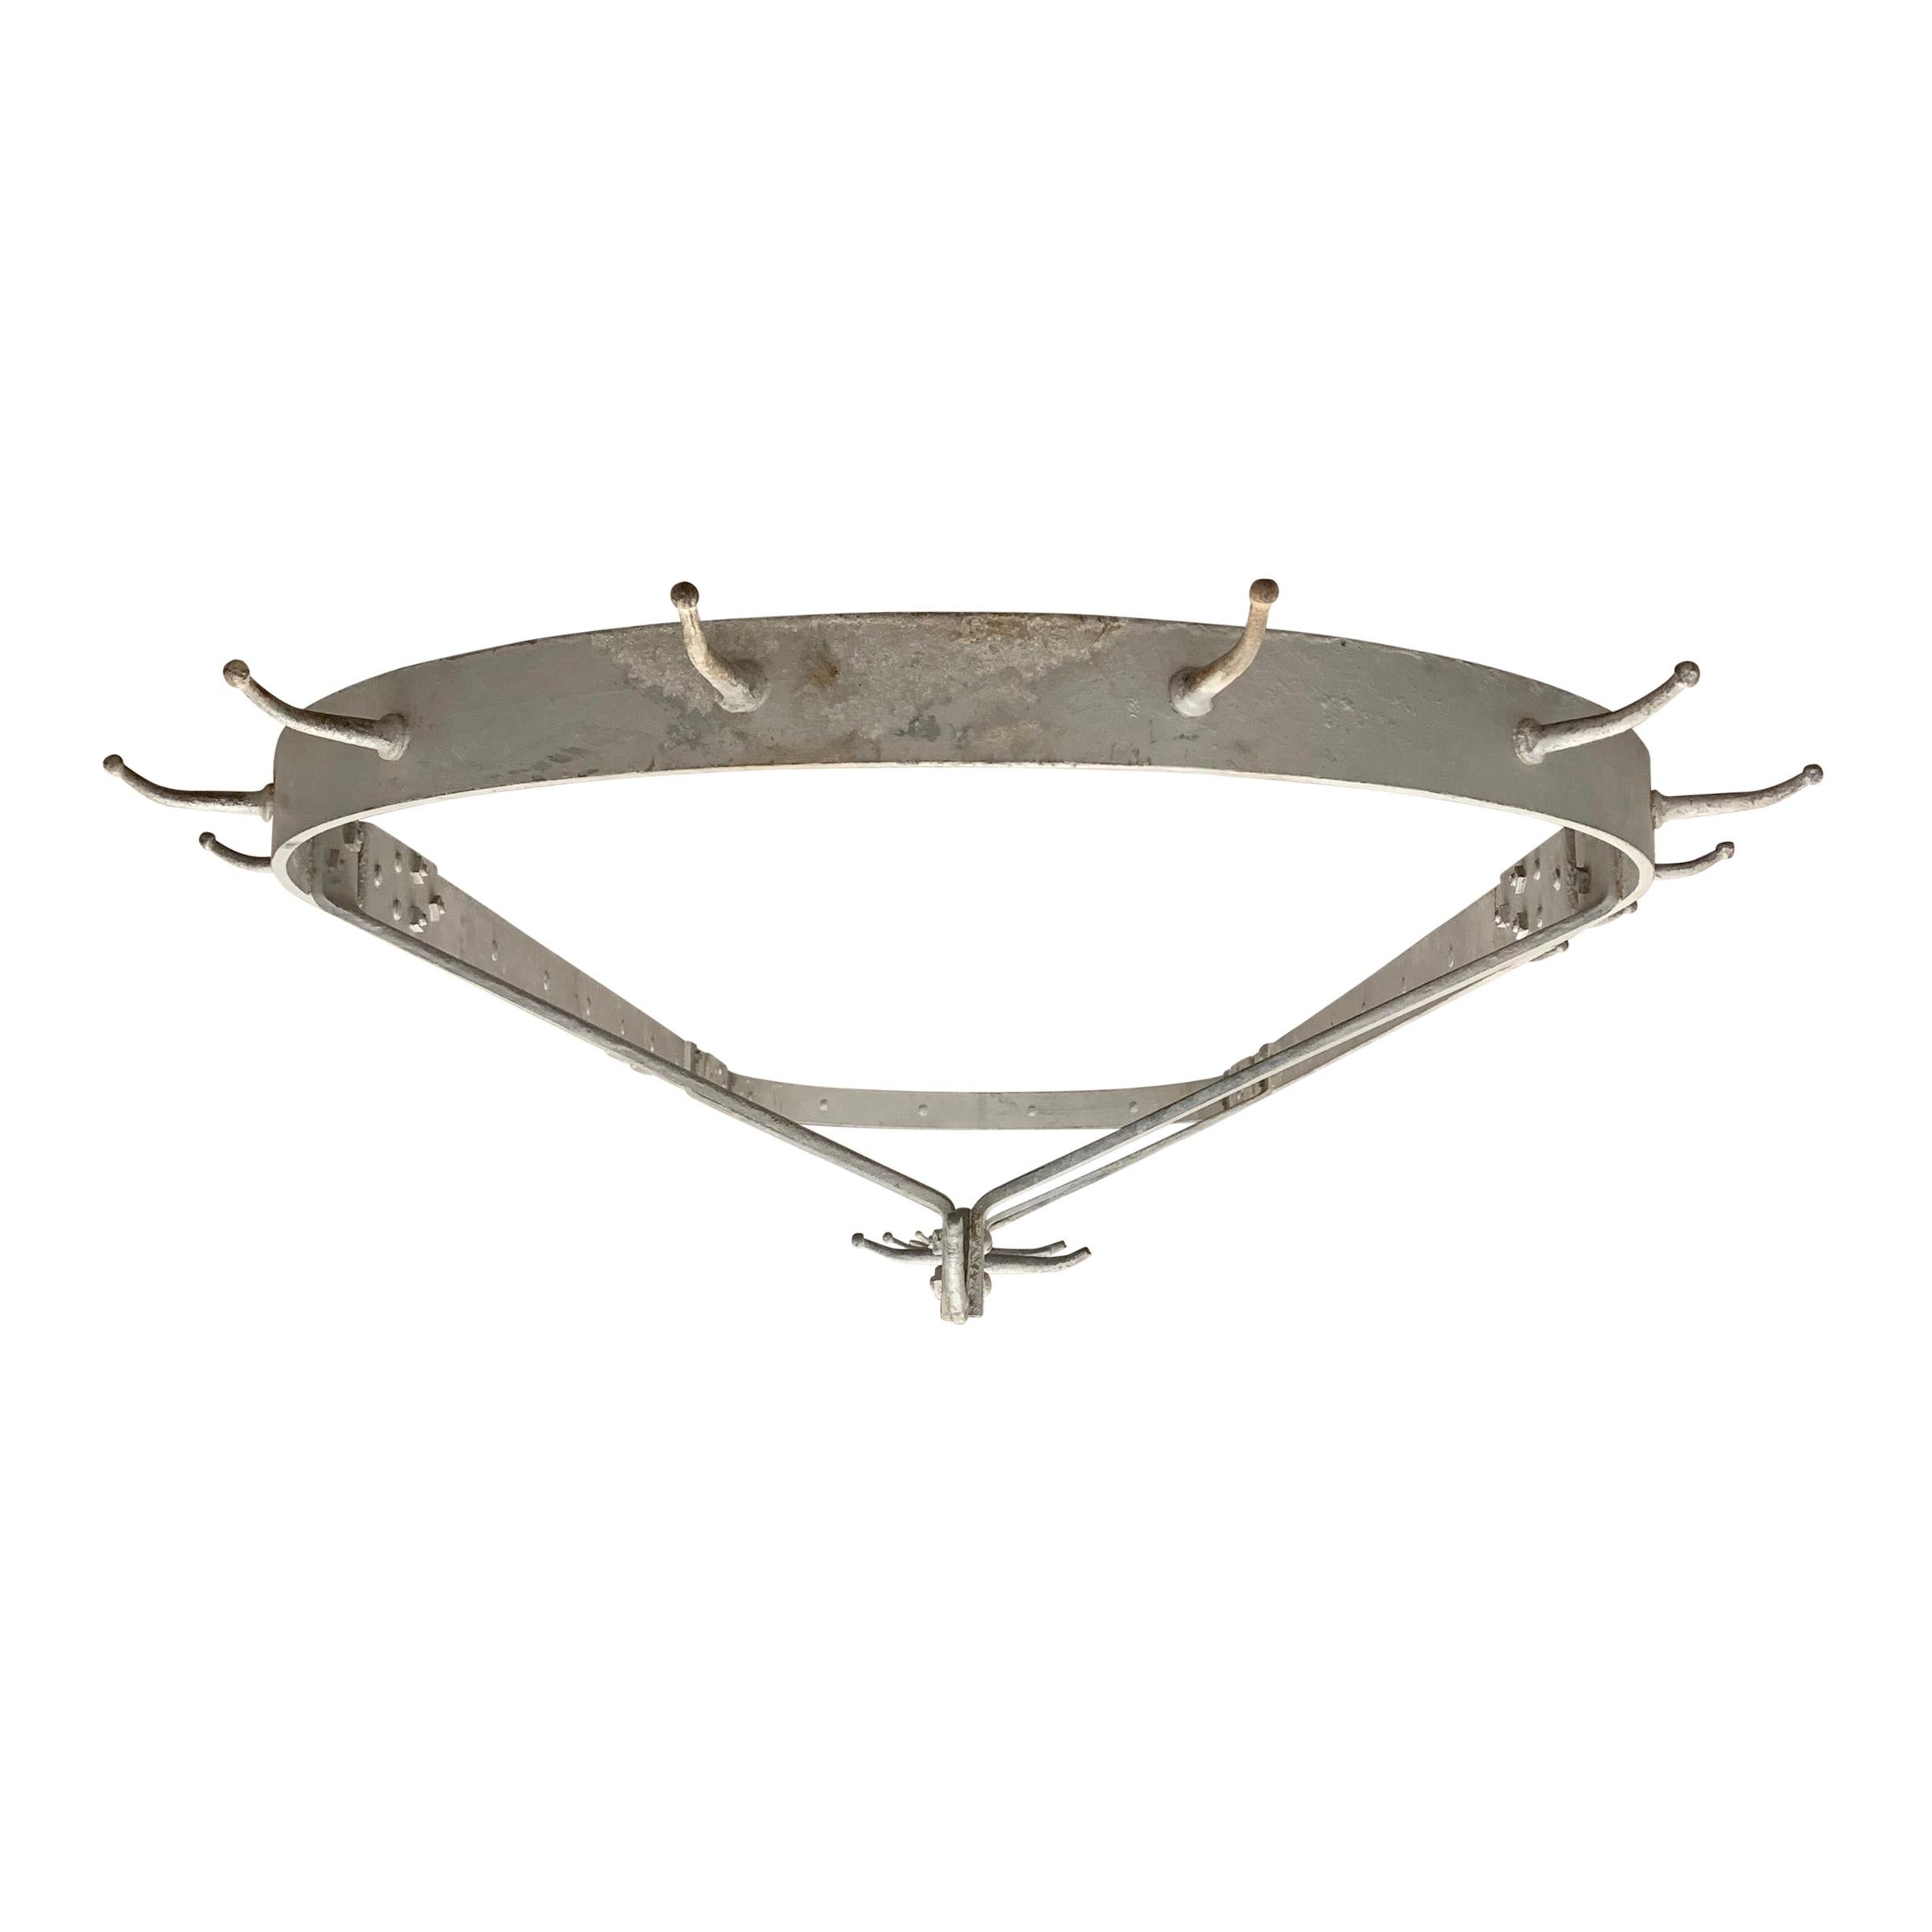 A wonderful American industrial steel pot rack with fixed hooks both inside and outside of the oval frame, and an old silver chipped paint surface. Perfect for a large kitchen, but could also be suspended in a cool entry way and used for hats and